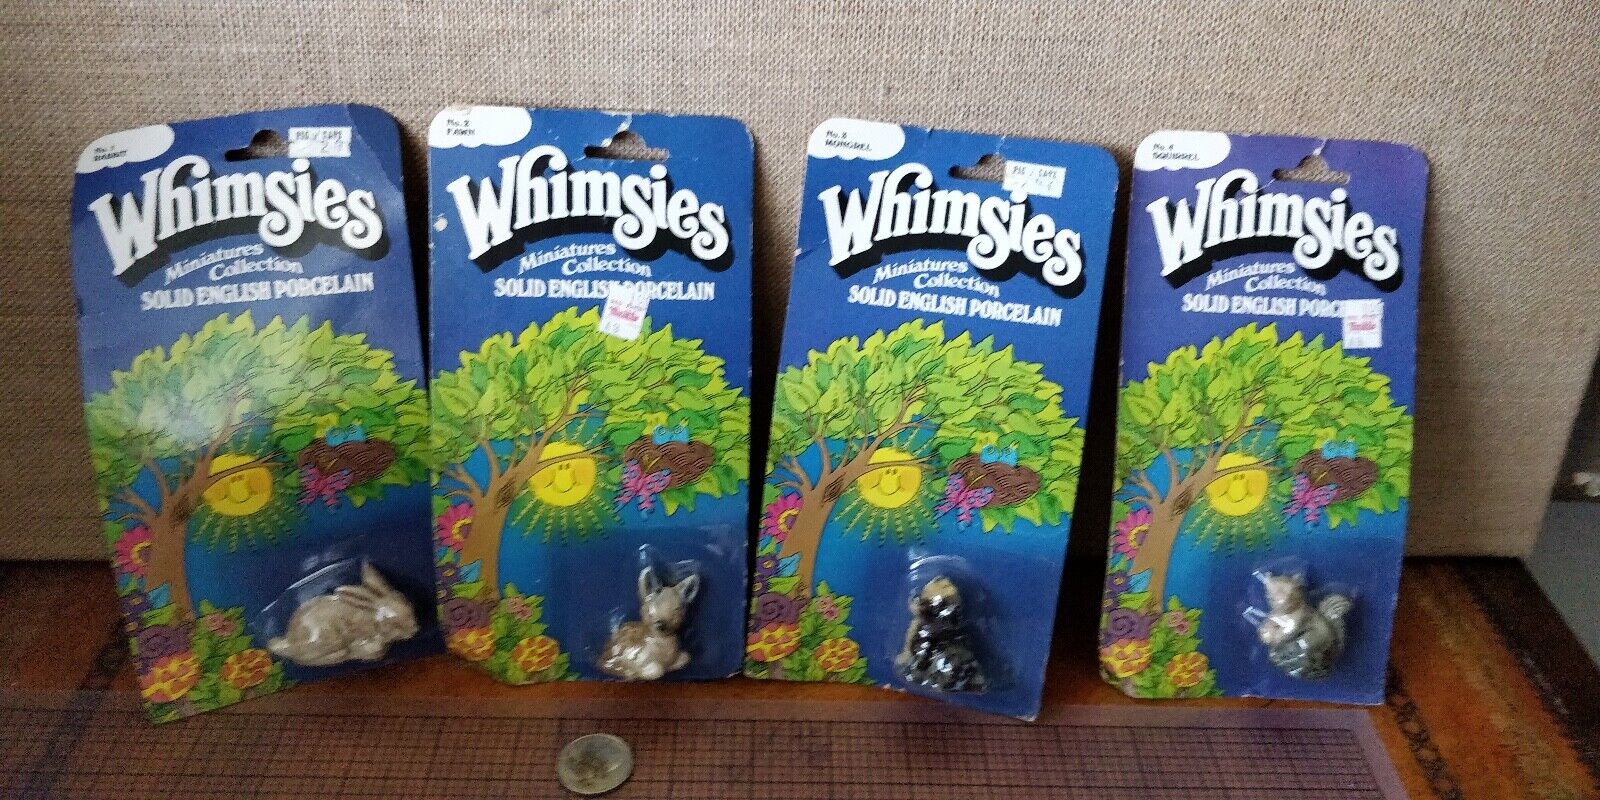 Wade Whimsies - Simons Associates - Near Complete Set - NEW IN BOX- 23 FIGURINES